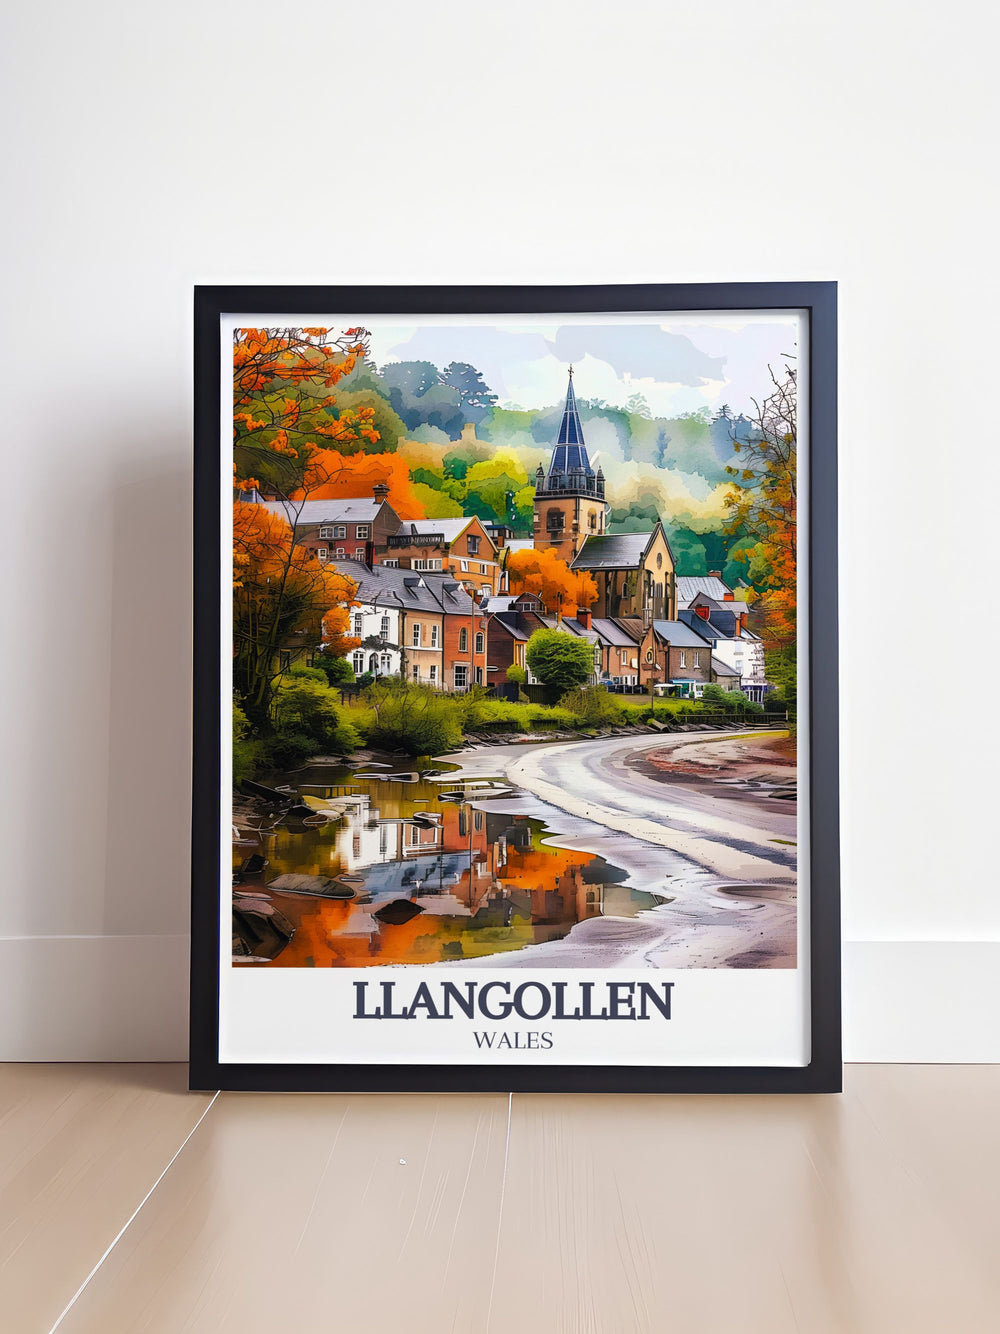 Showcase Llangollens charm with this wall art of River Dee, Llangollen Canal, and Llangollen Methodist Church, ideal for Wales artwork enthusiasts.